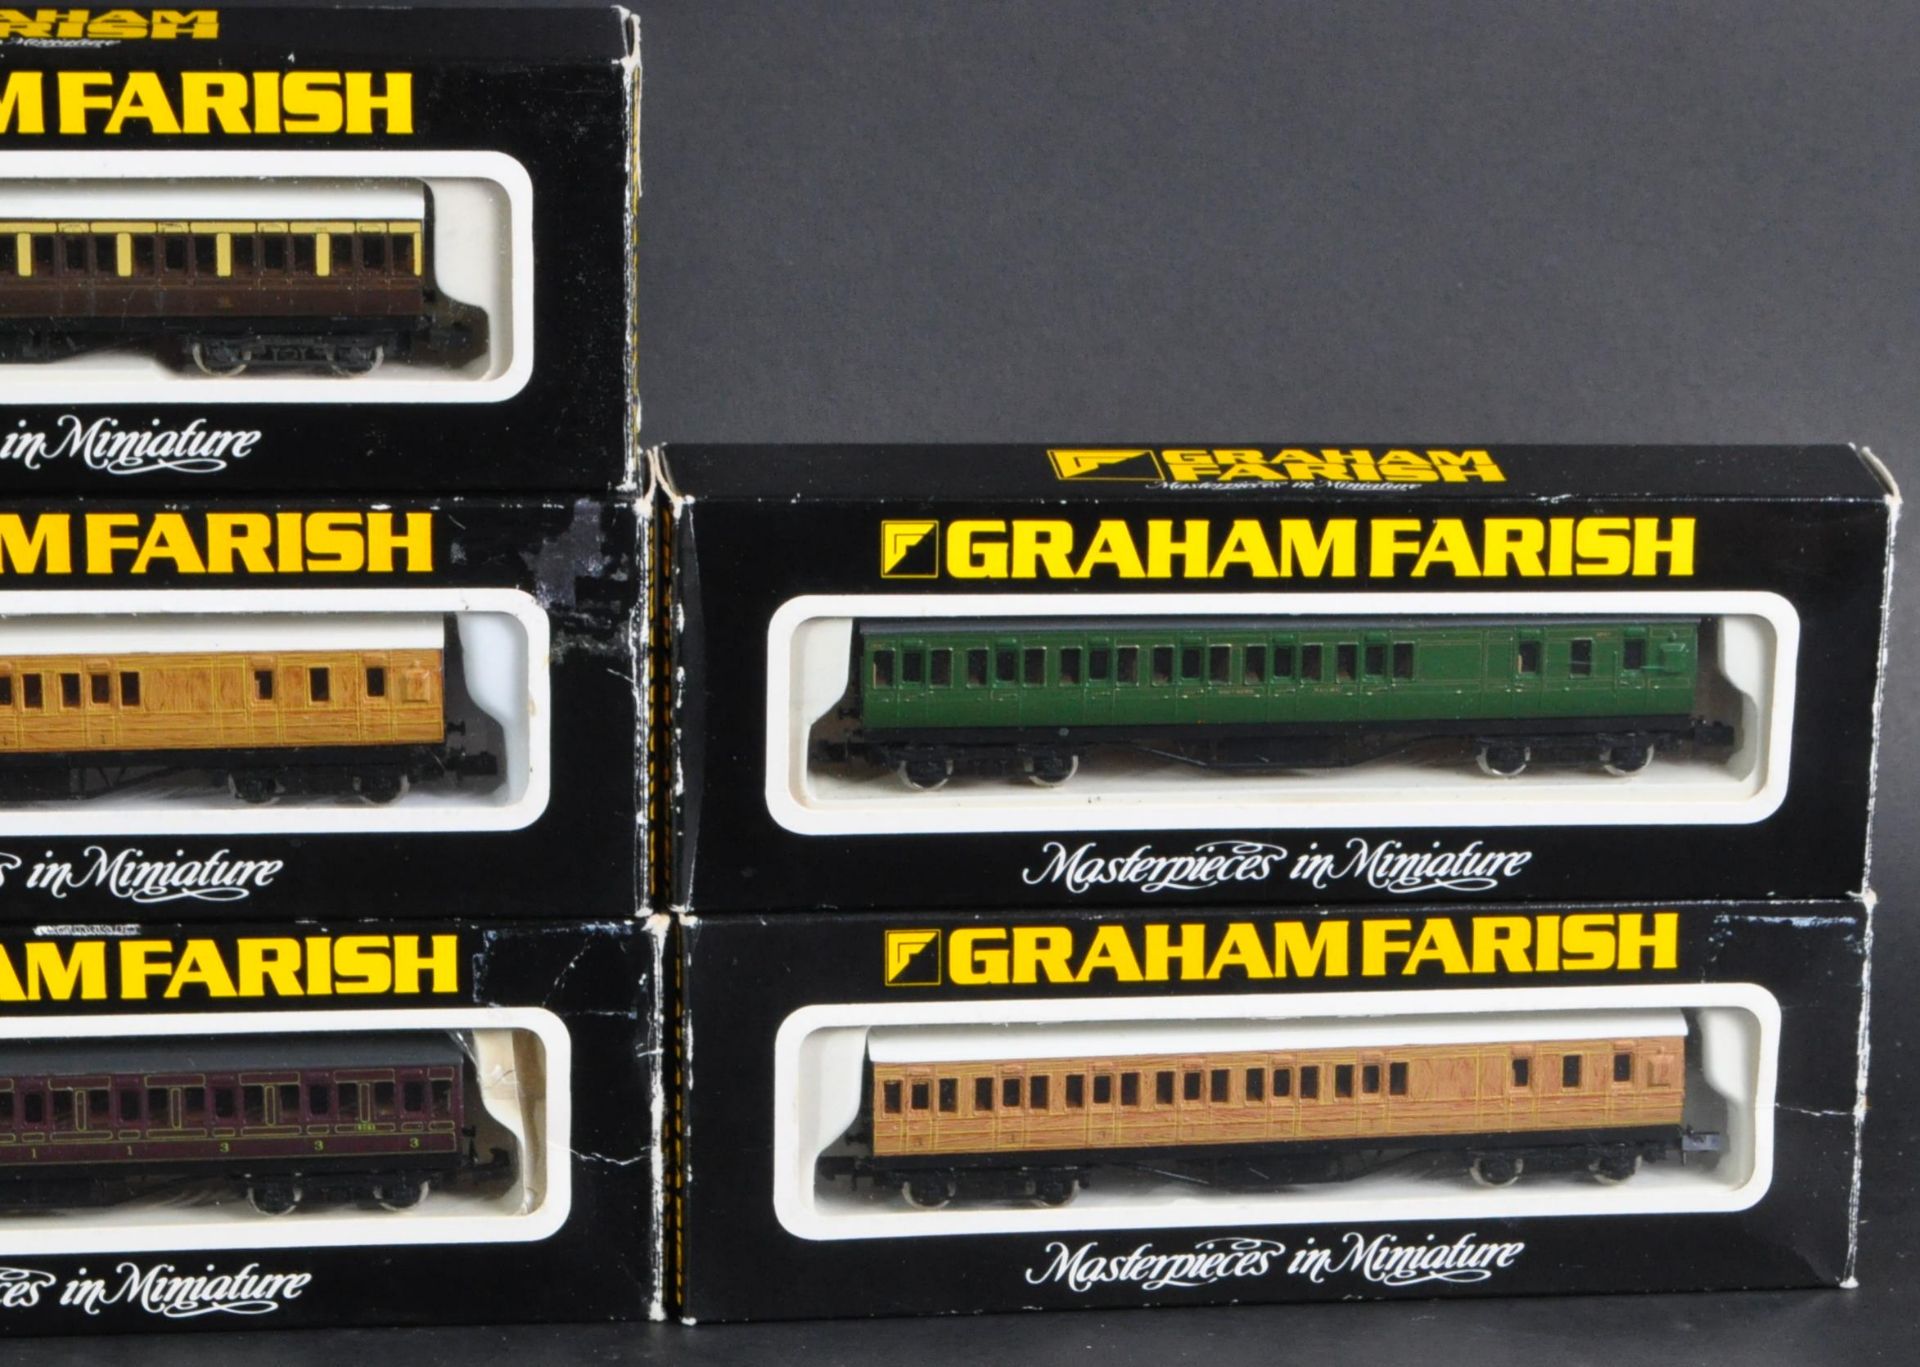 COLLECTION OF GRAHAM FARISH N GAUGE MODEL RAILWAY CARRIAGES - Image 5 of 5